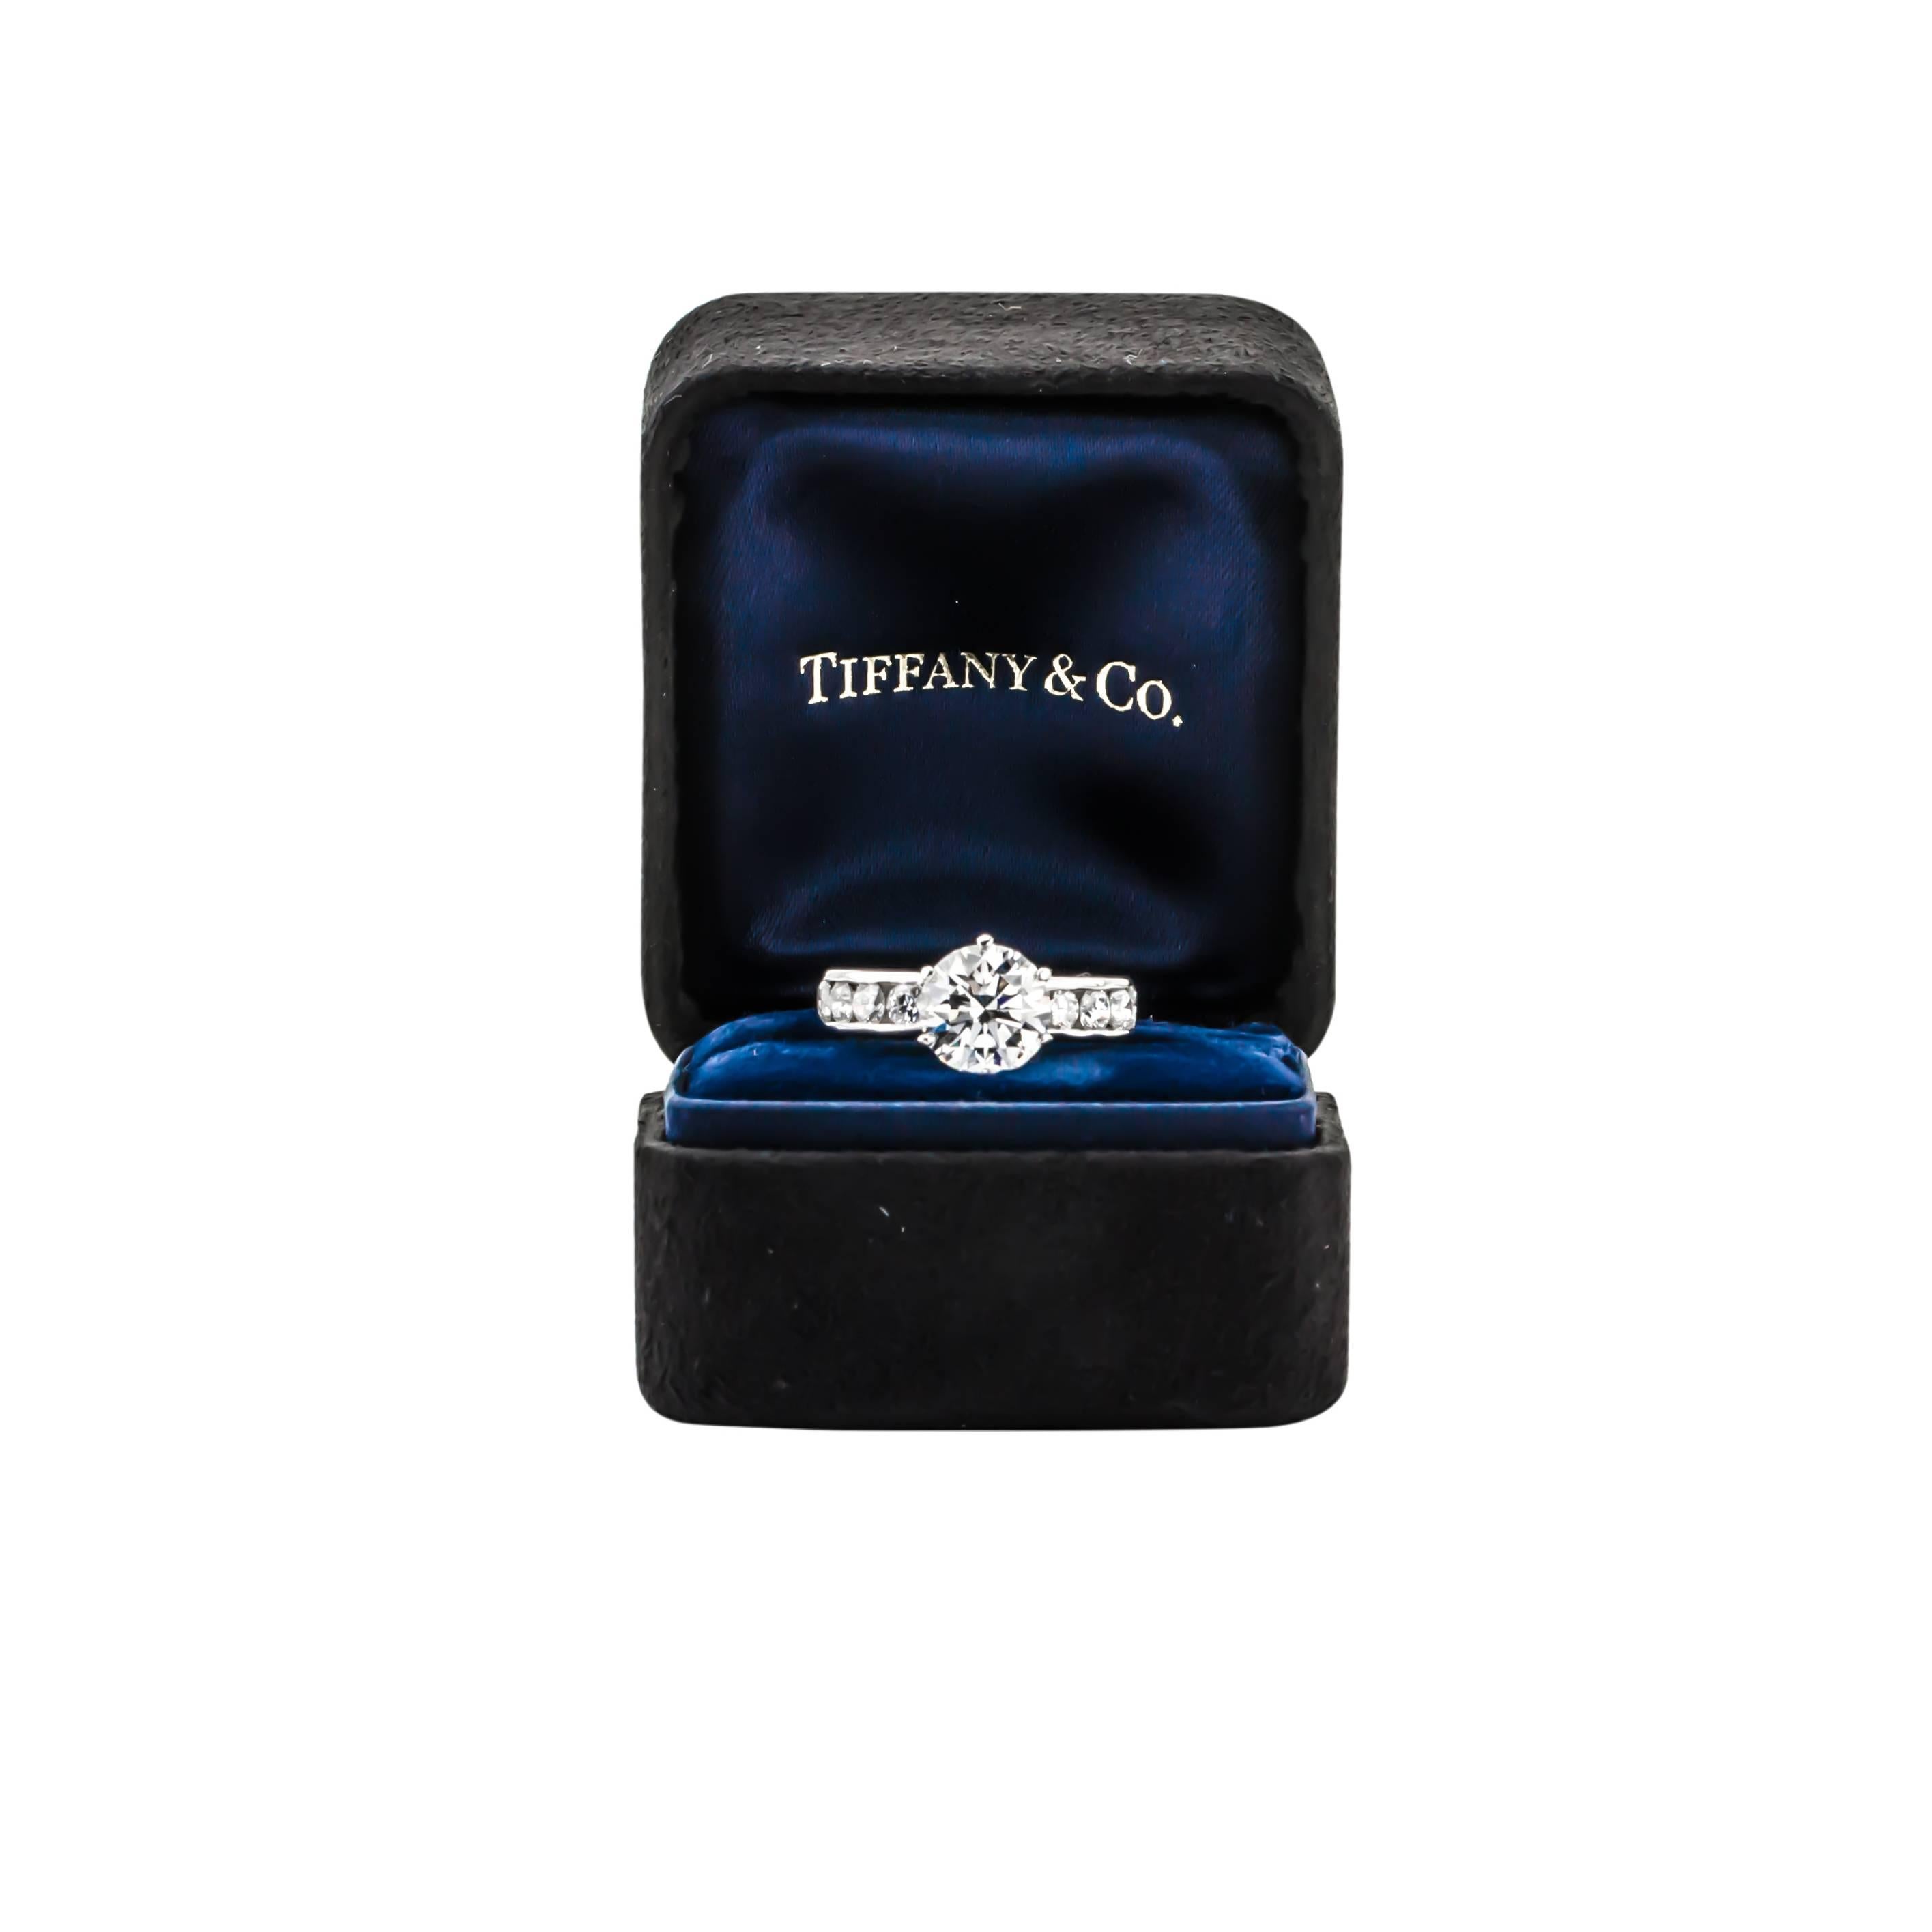 Stunning Tiffany & Co. engagement ring featuring one 2.08 carat round brilliant cut diamond with H color and VS1 clarity.  The ring is also set with eight round brilliant cut diamonds equaling .72 carats. 

This beautiful platinum ring is a size